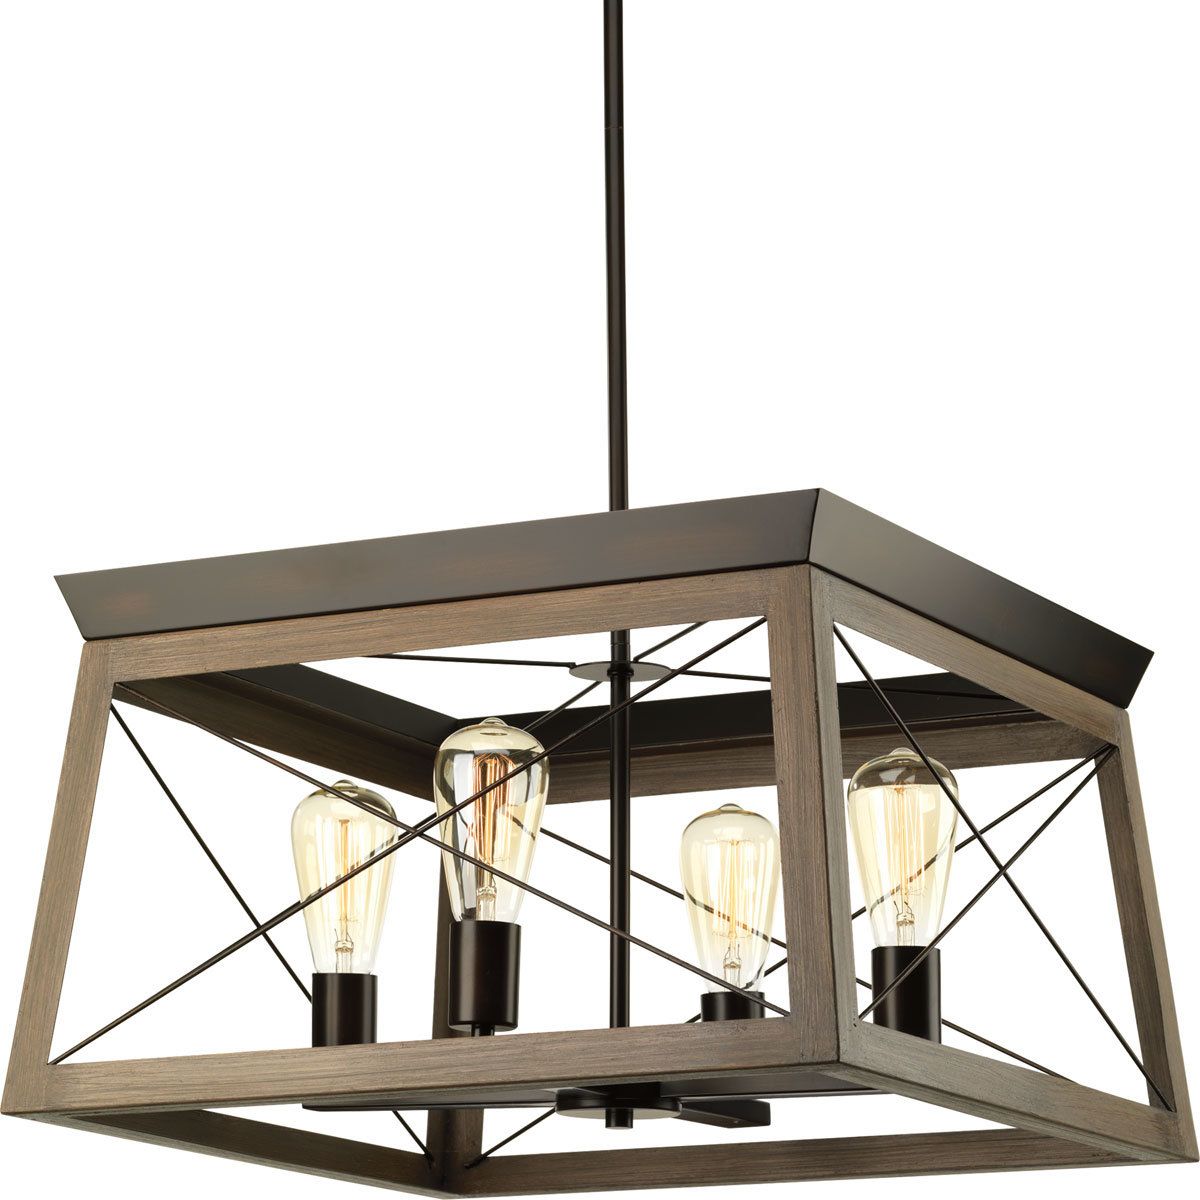 2019 Laurel Foundry Modern Farmhouse Delon 4 Light Square/rectangle Chandelier Pertaining To Delon 4 Light Square Chandeliers (View 2 of 20)